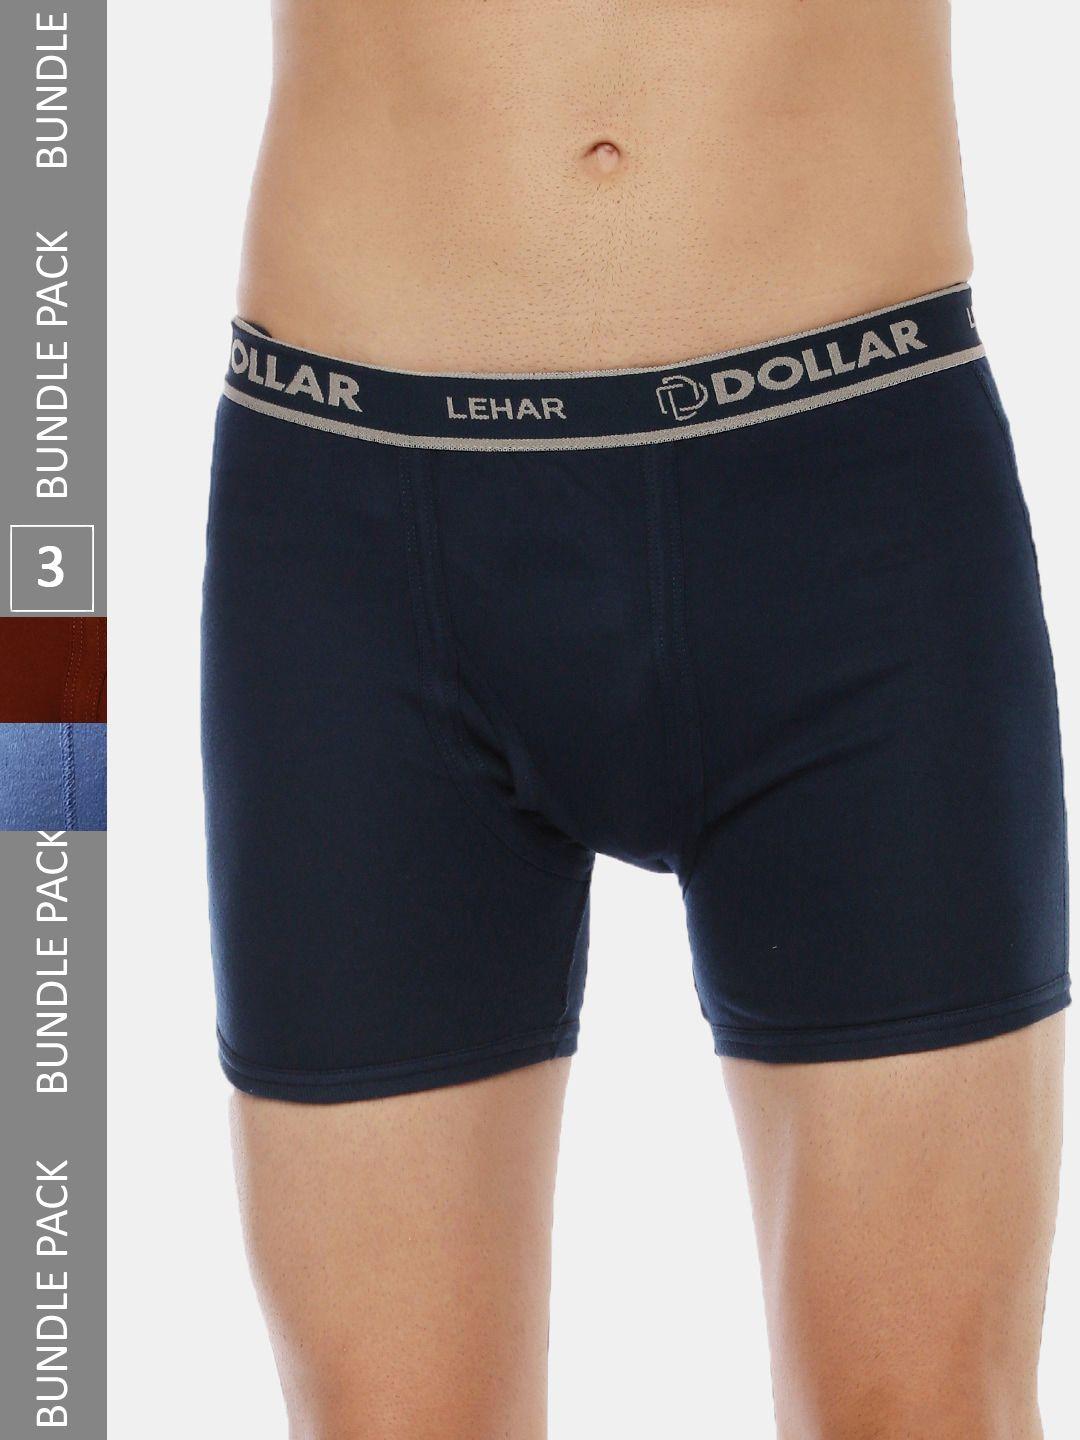 dollar lehar men pack of 3 assorted stretchable pure cotton trunks